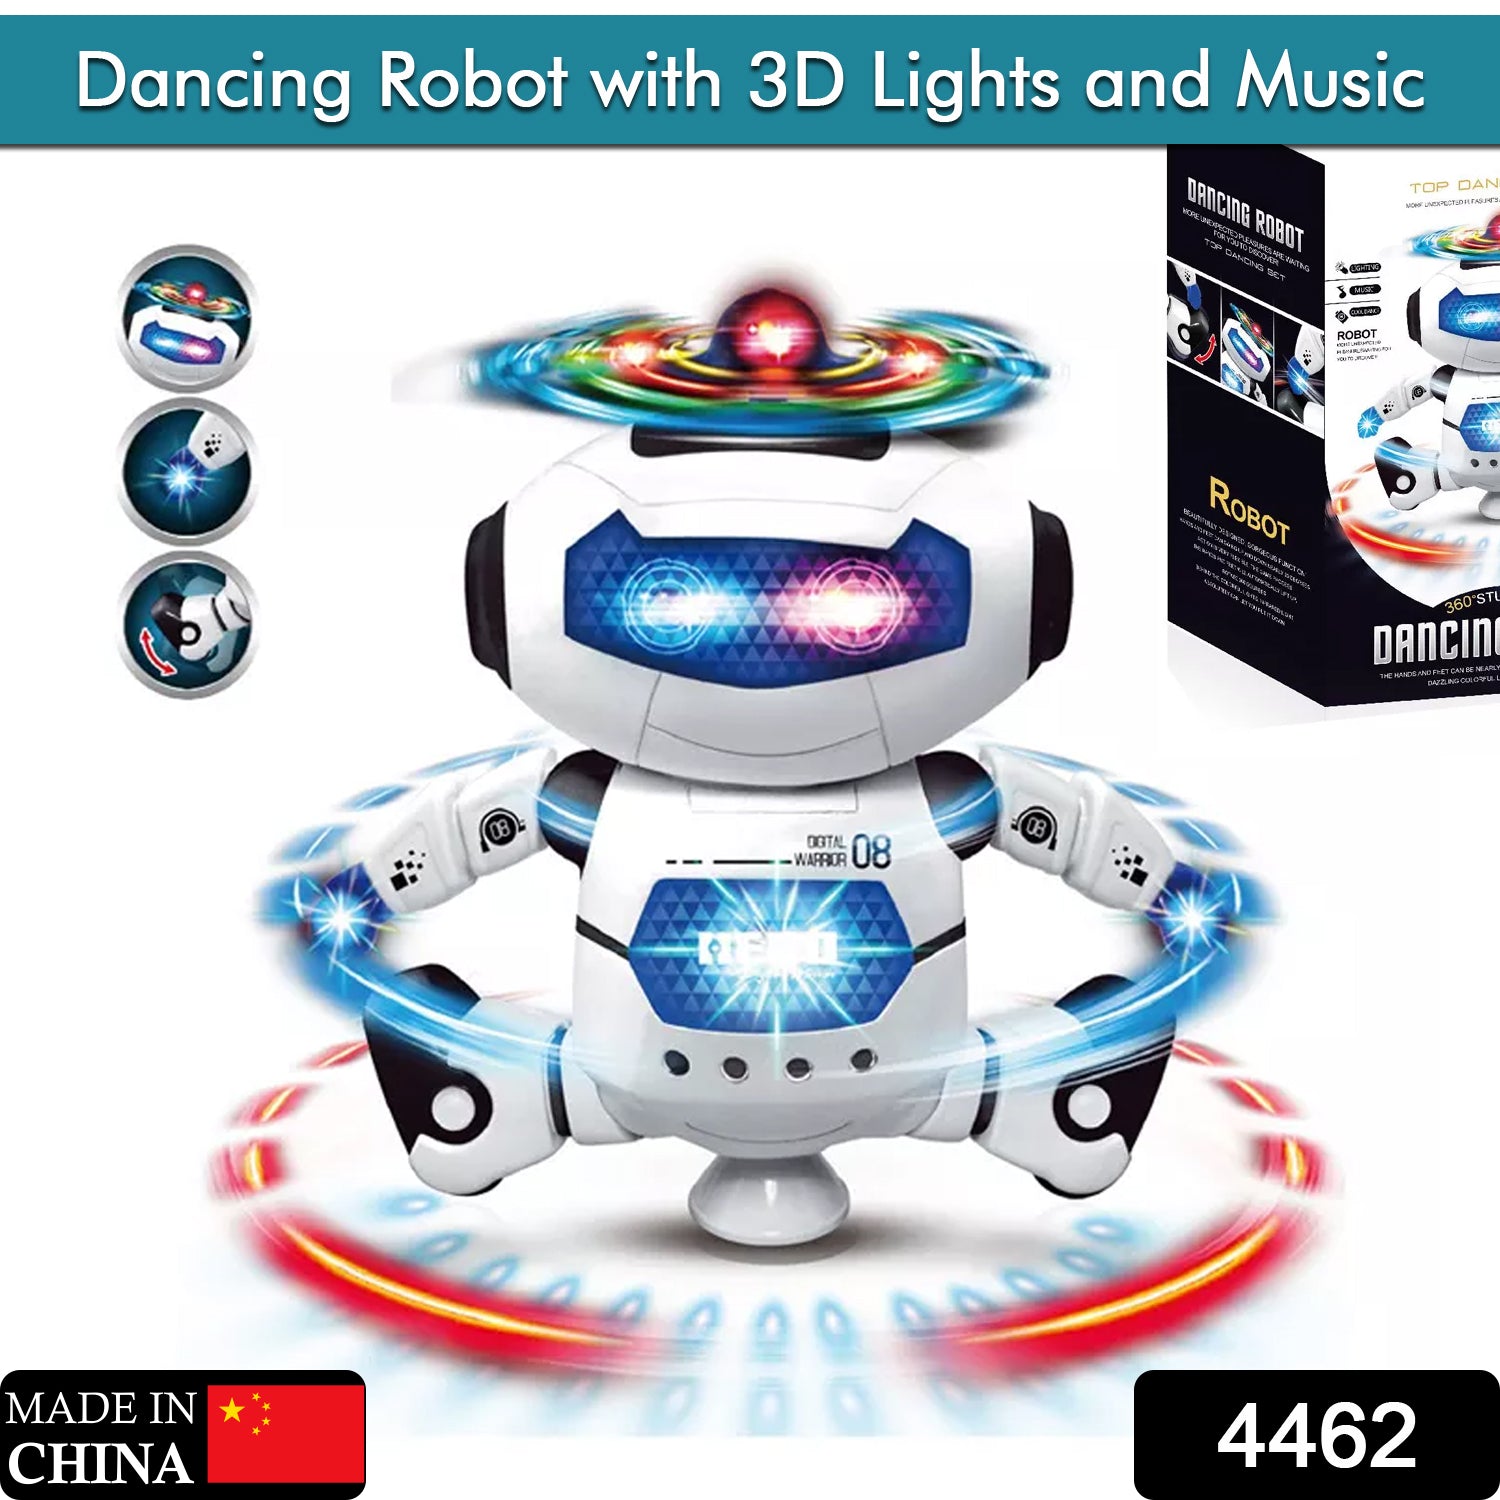 4462 ﻿Dancing Robot with 3D Lights and Music. 